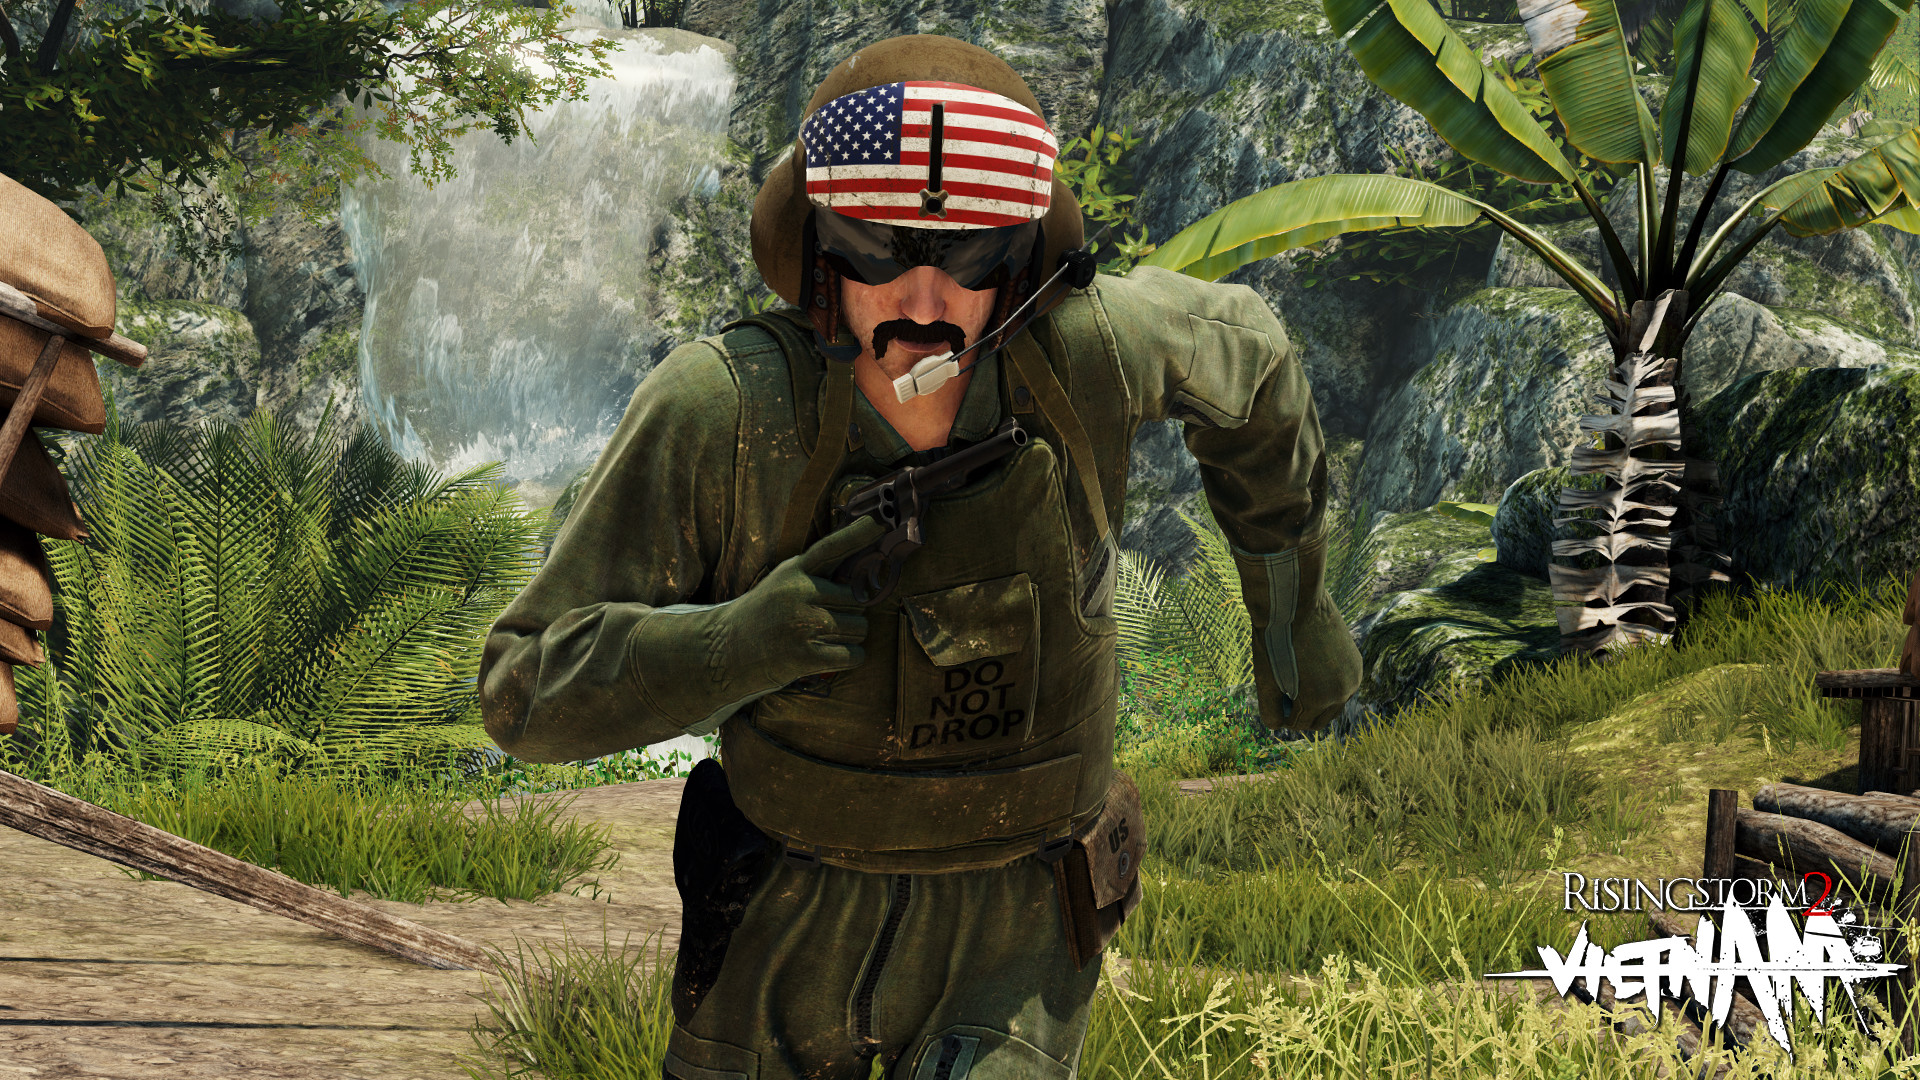 Rising Storm 2: Vietnam - Born in the USA Cosmetic DLC Featured Screenshot #1